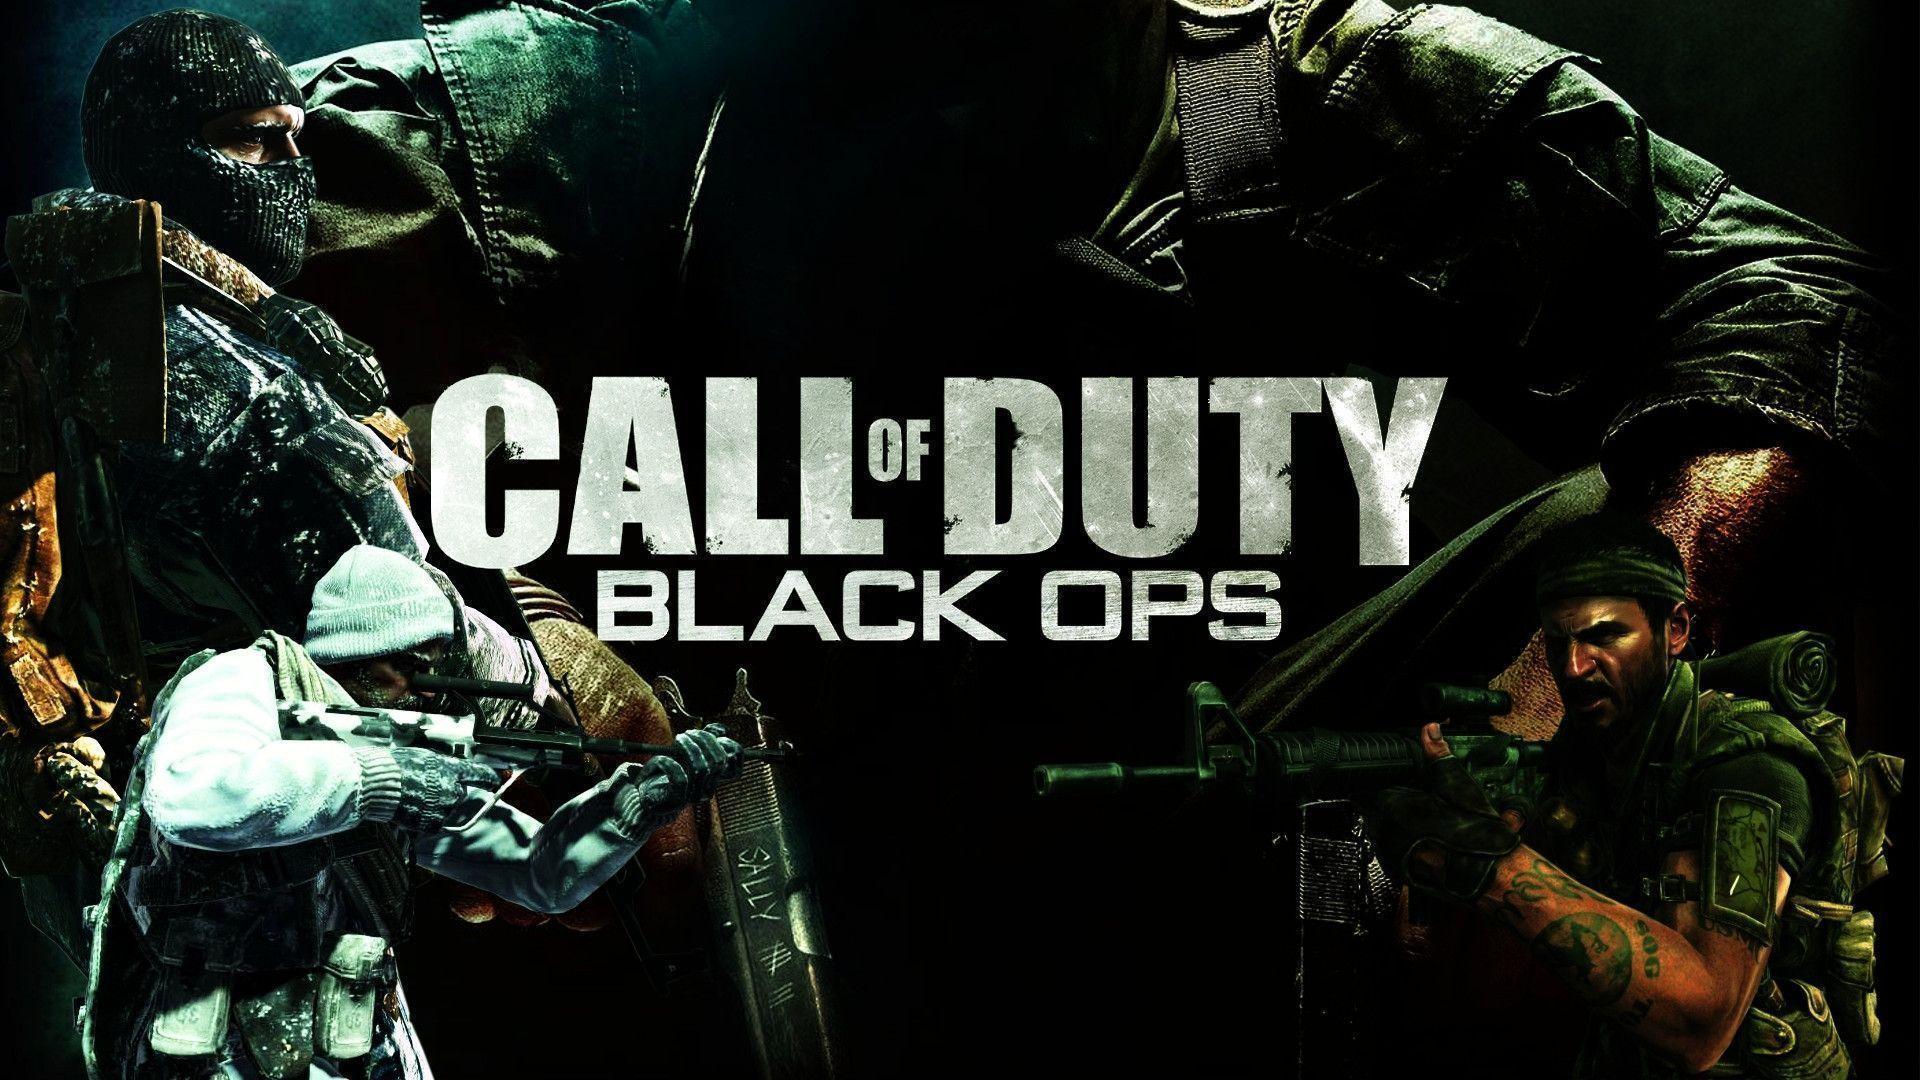 Call Of Duty Black Ops Xbox wallpaper